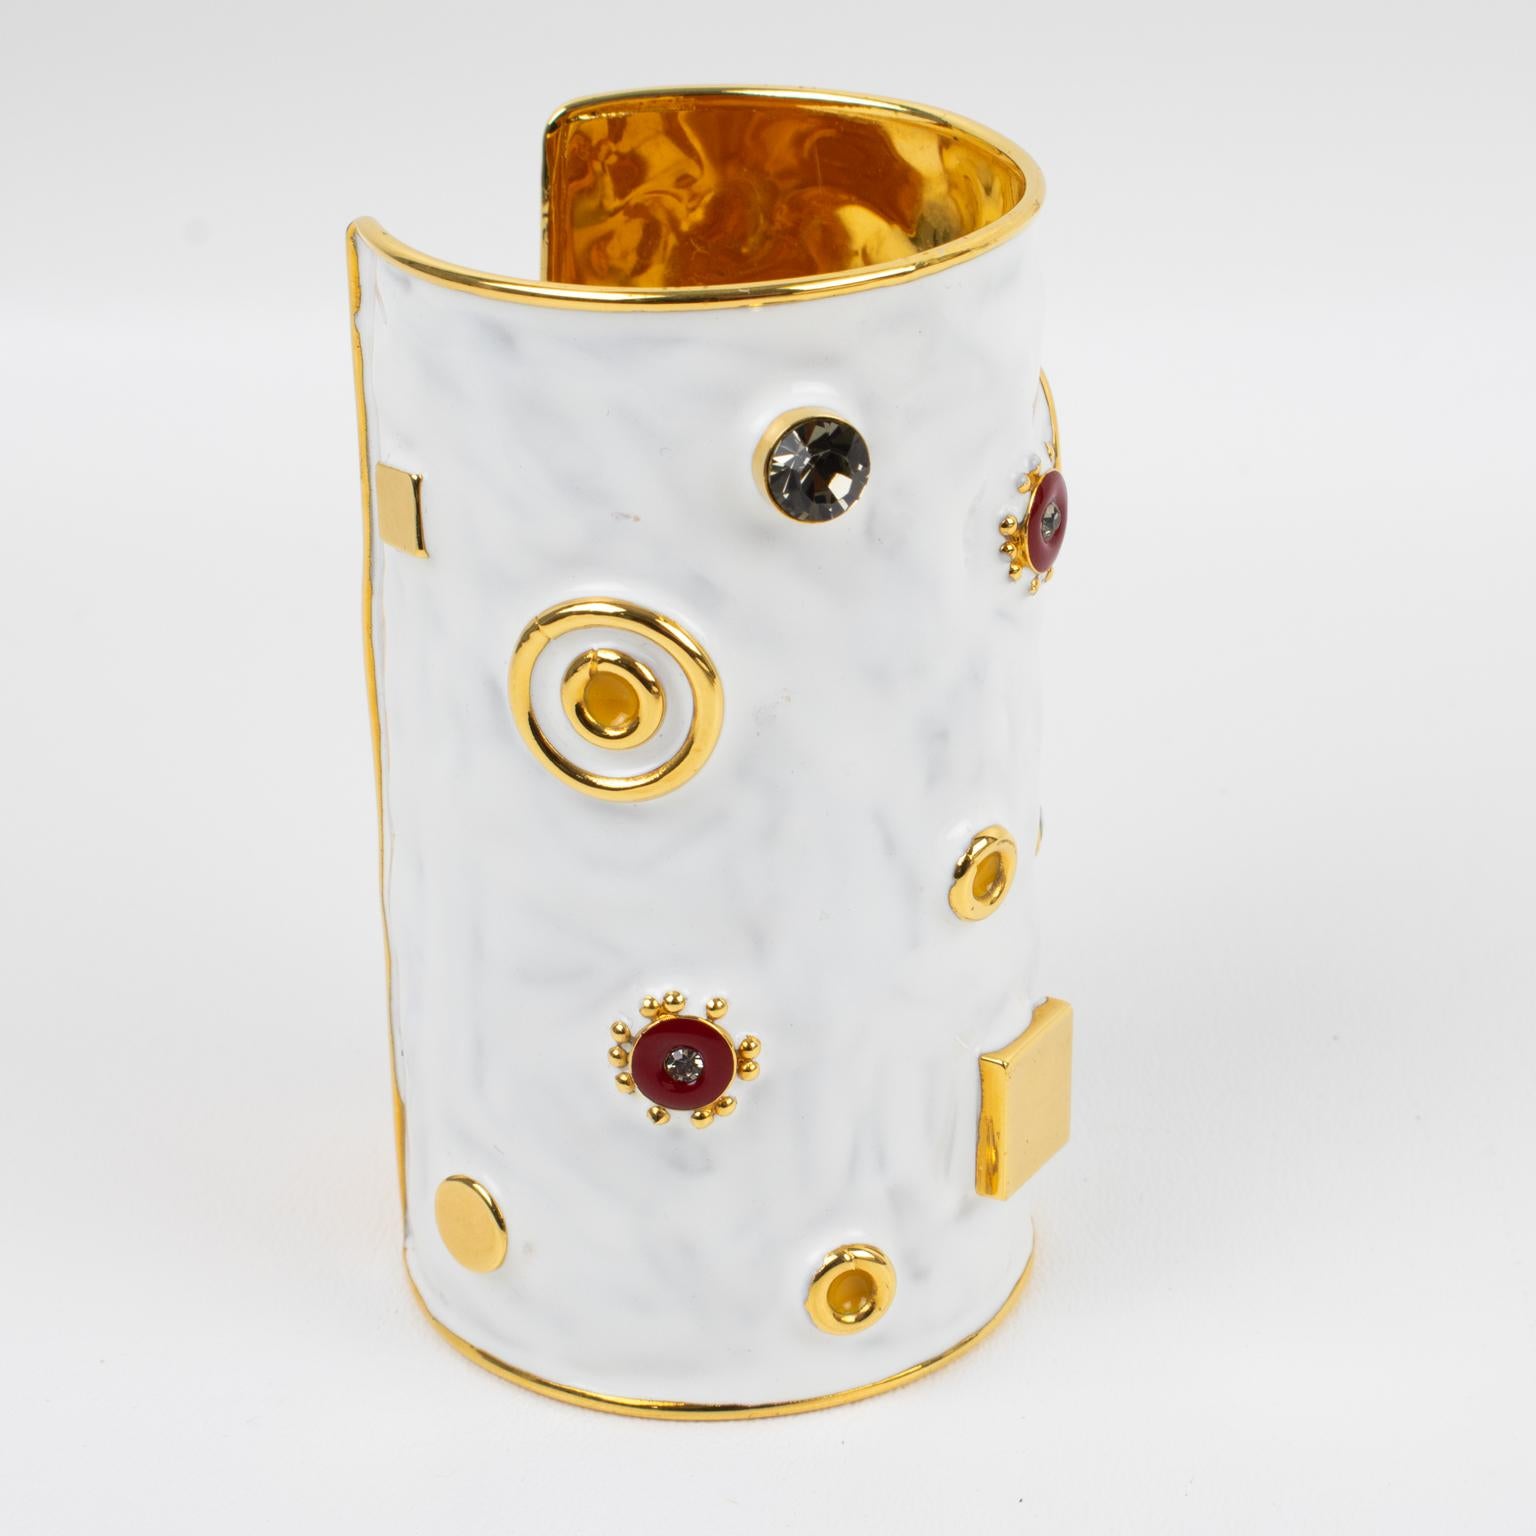 Stunning Marni jeweled cuff bracelet bangle. Oversized cuff shape in shiny gilt metal with hand-made feel, topped with white enameling and ornate with gilt metal cabochons, red enamel, and crystal rhinestones. Engraved on the inside Marni - Made in